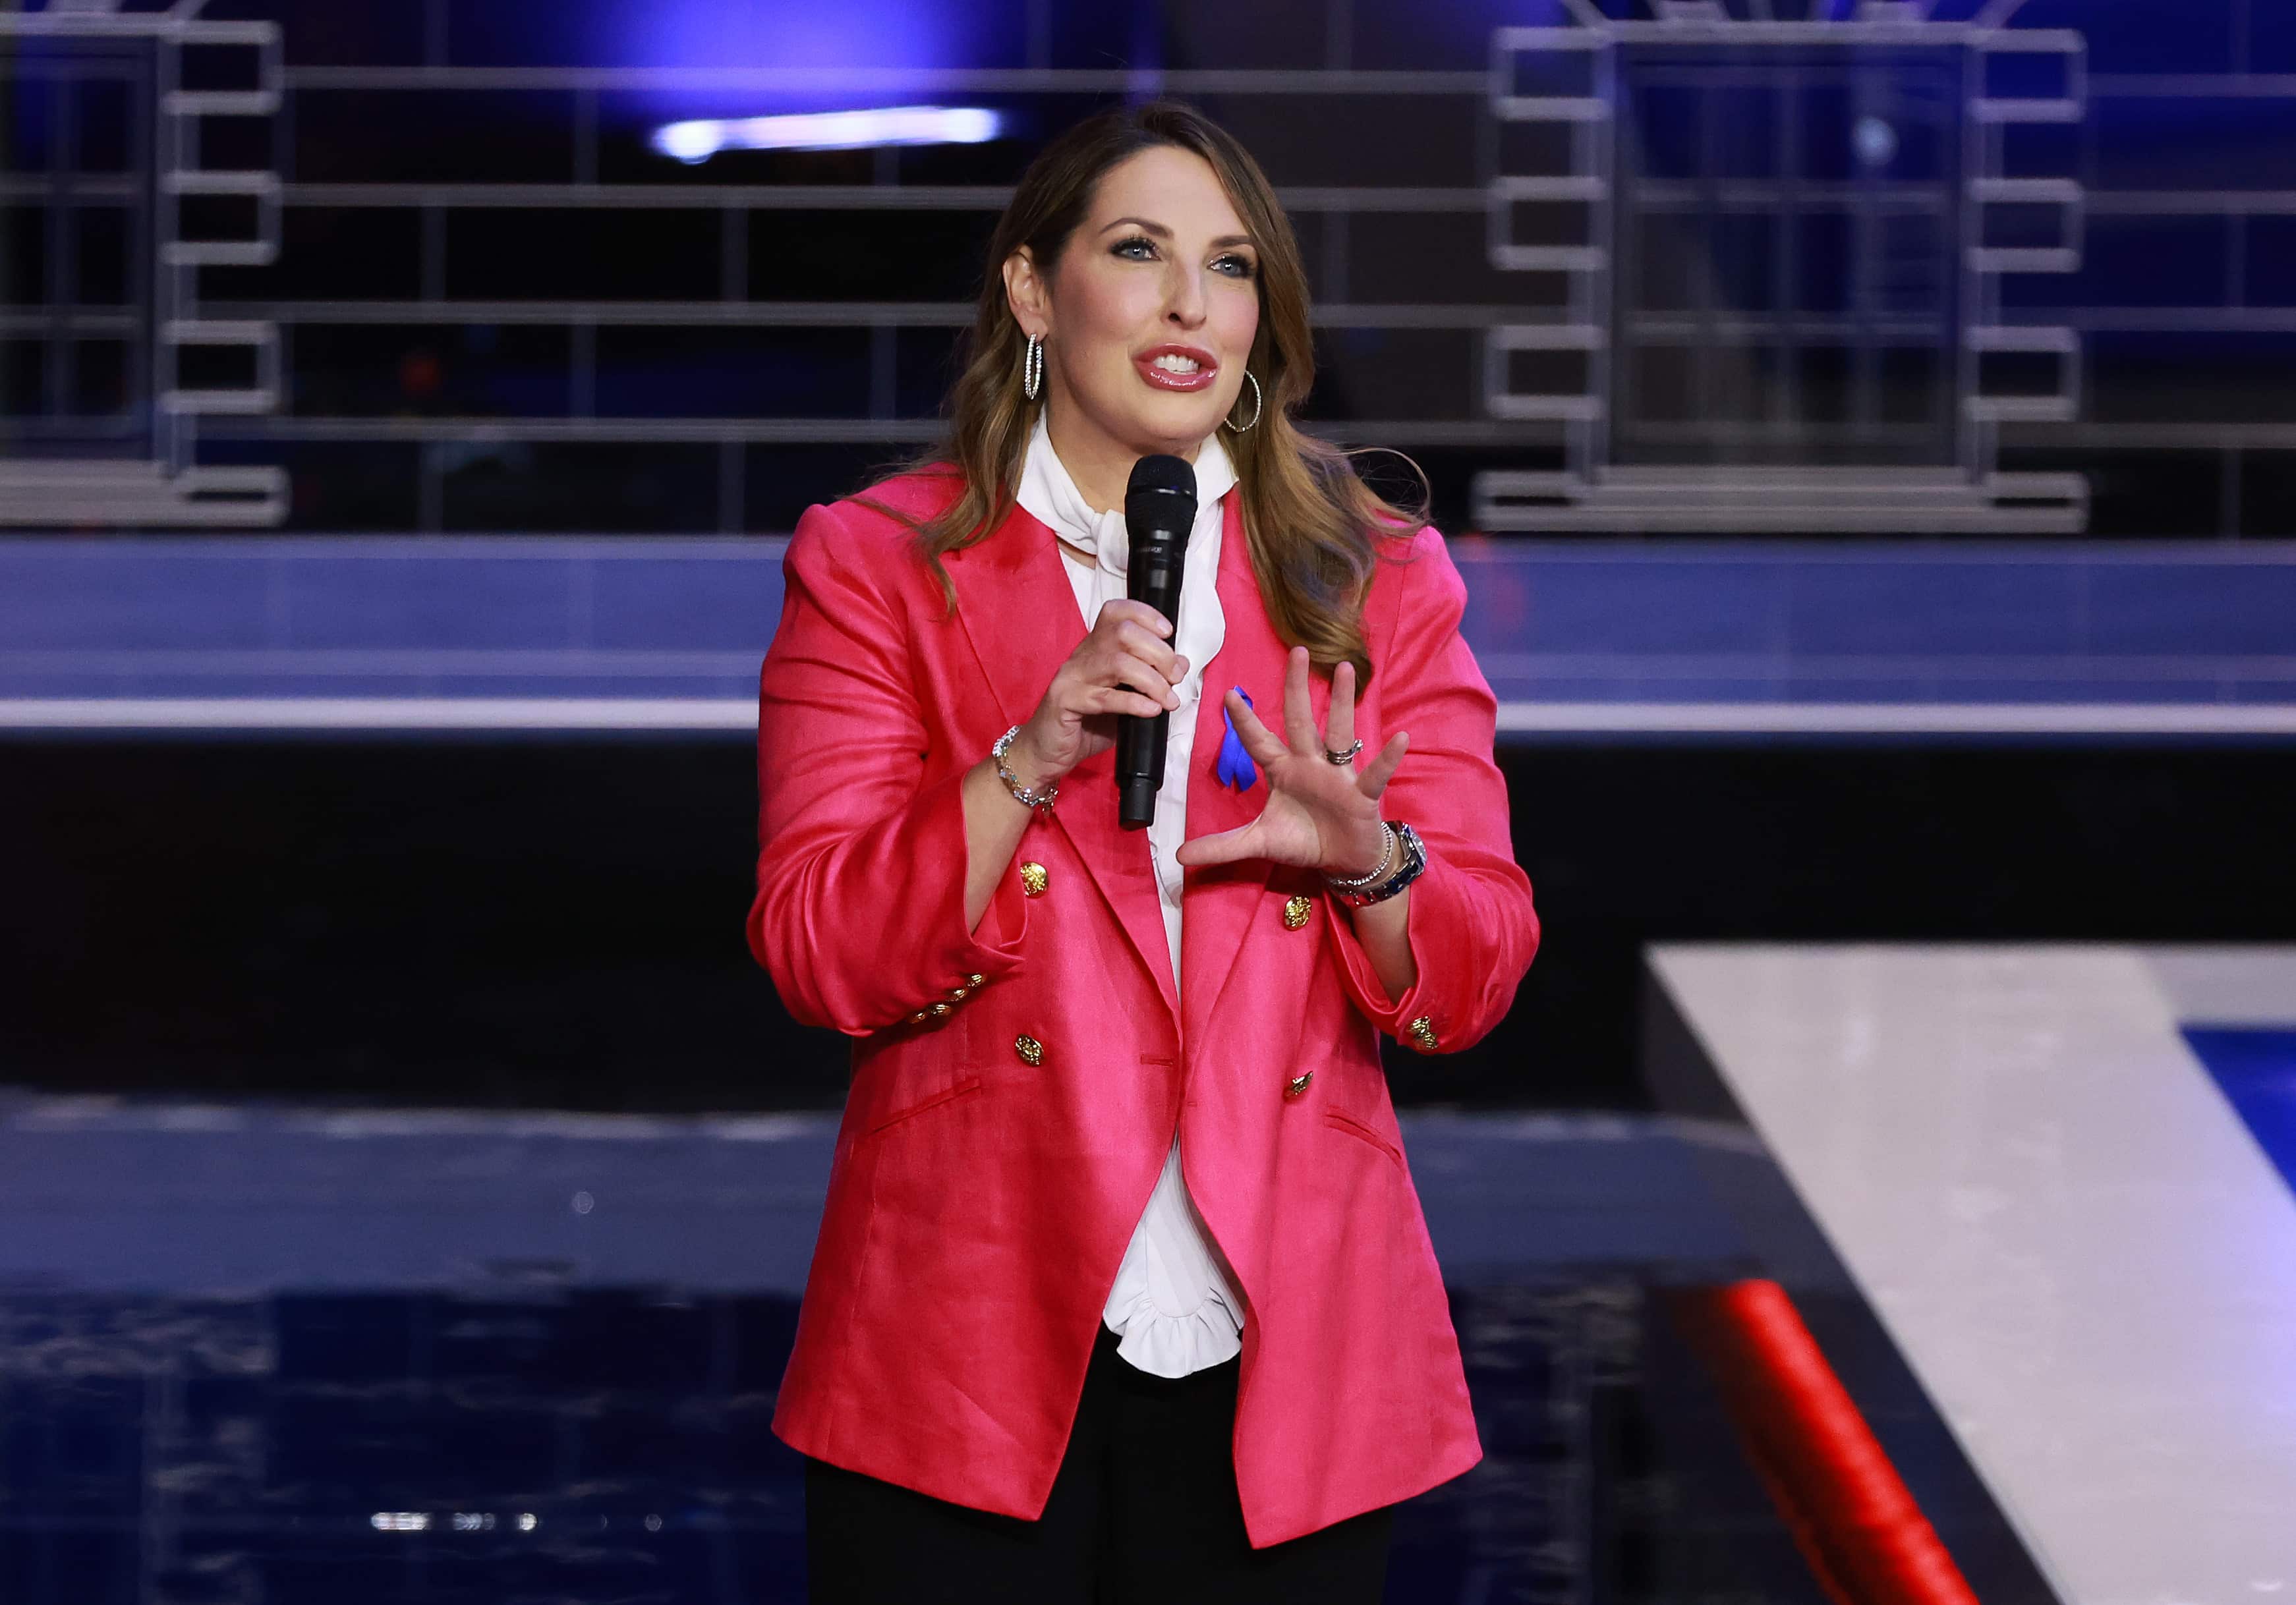 Controversy Continues Over NBC Hiring of Ronna McDaniel